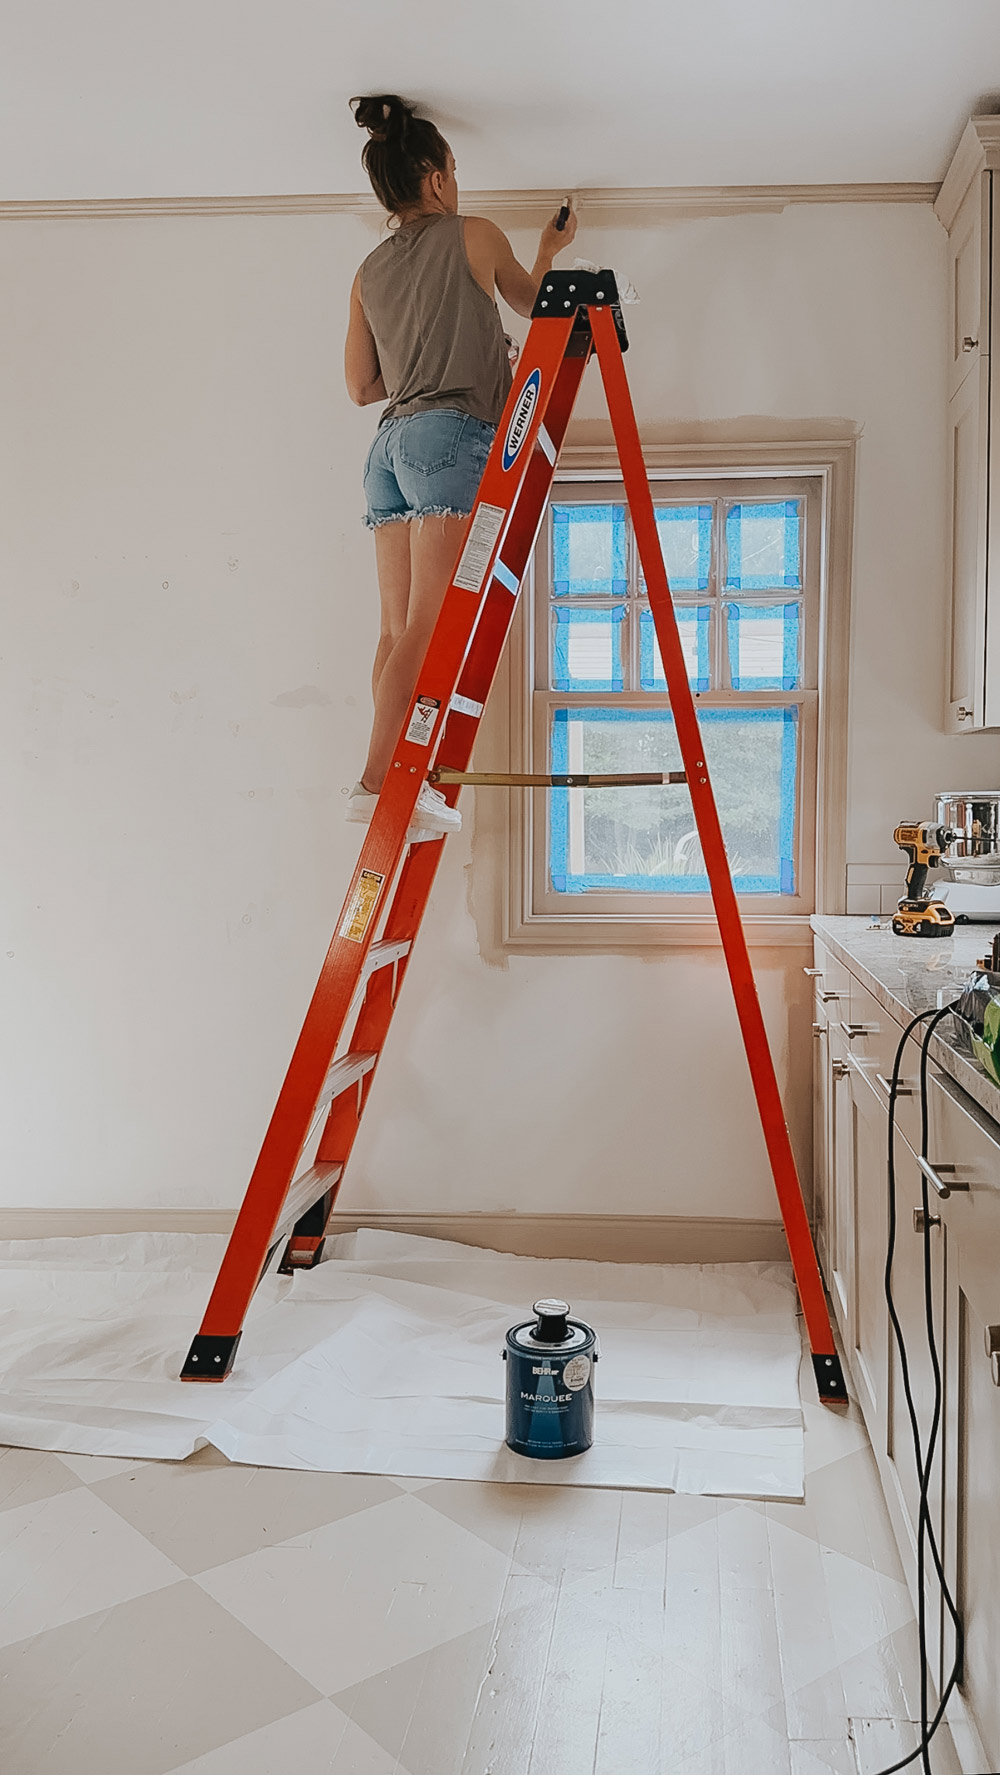 A person on a ladder painting a wall.